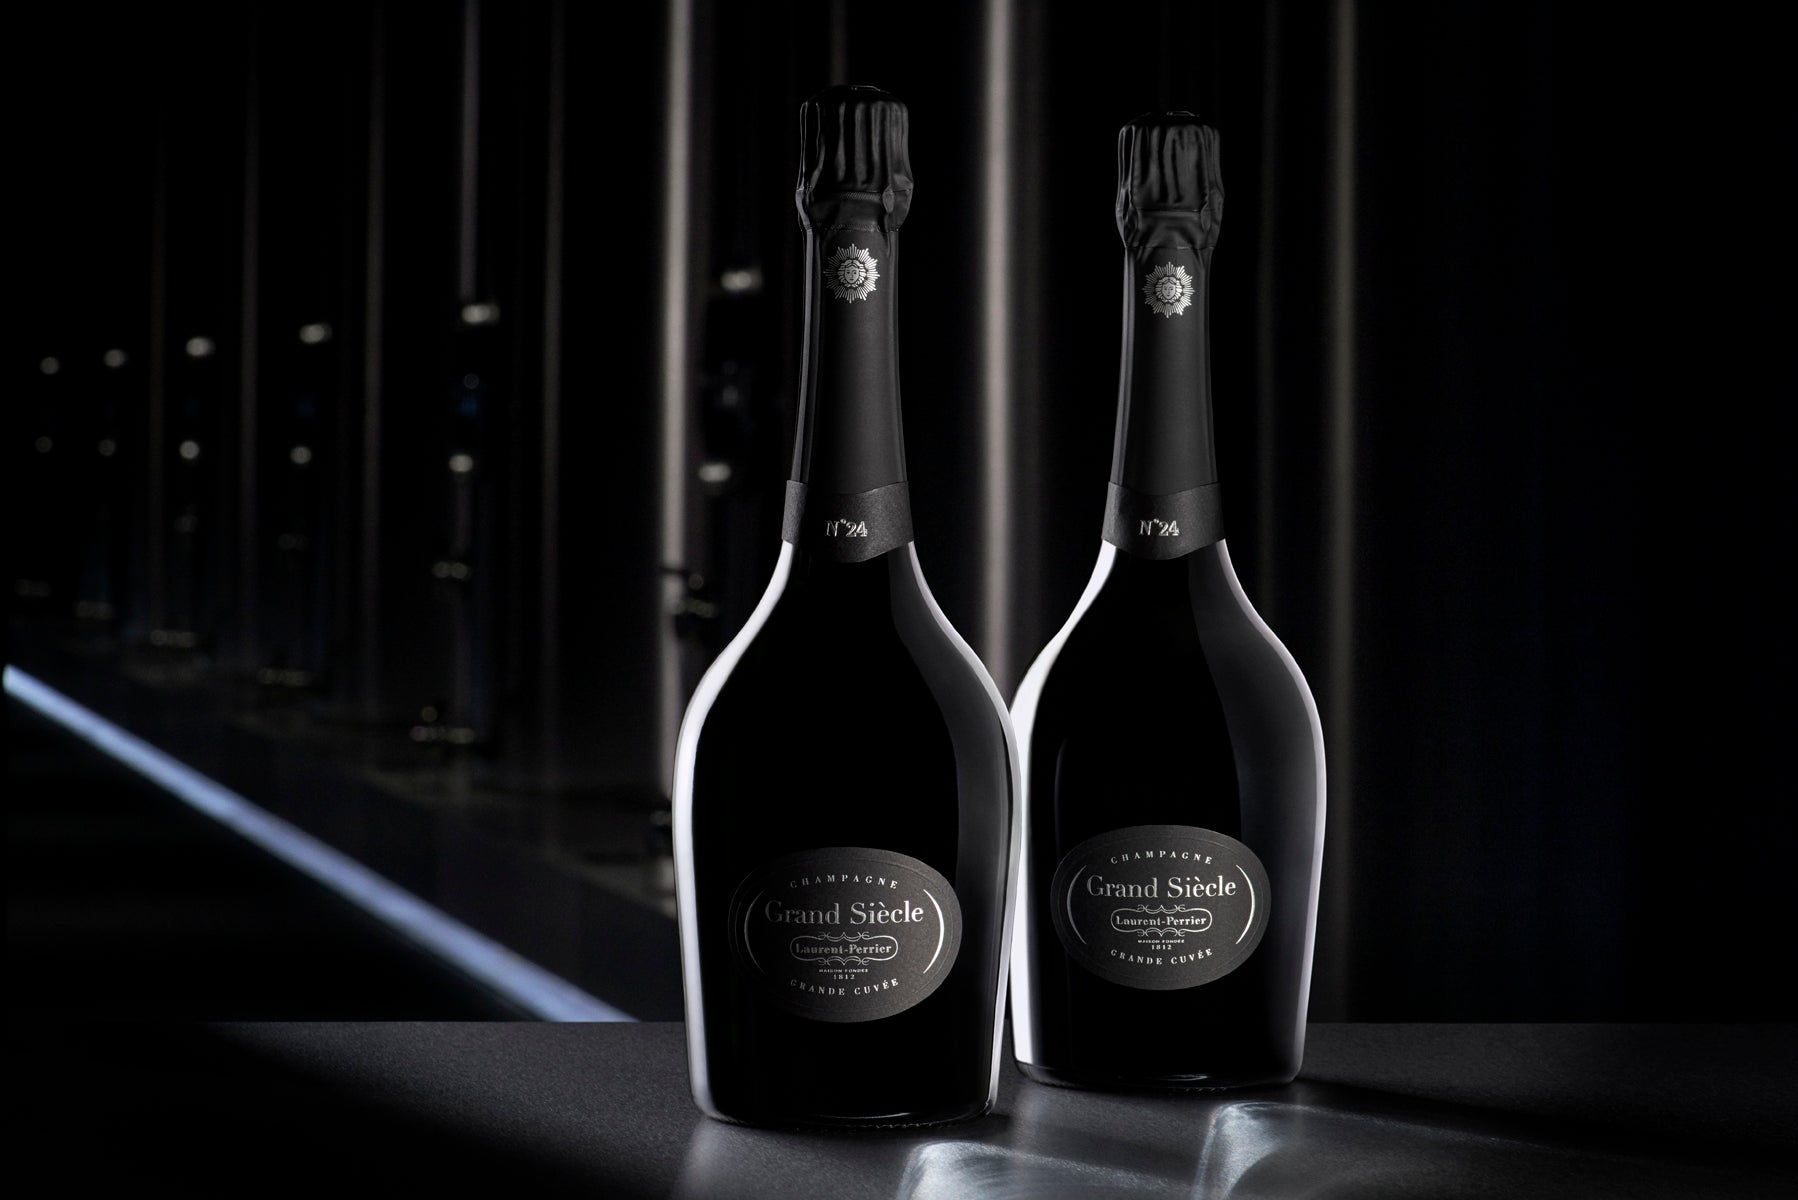 Laurent-Perrier Grand Siècle: The Art of Assemblage